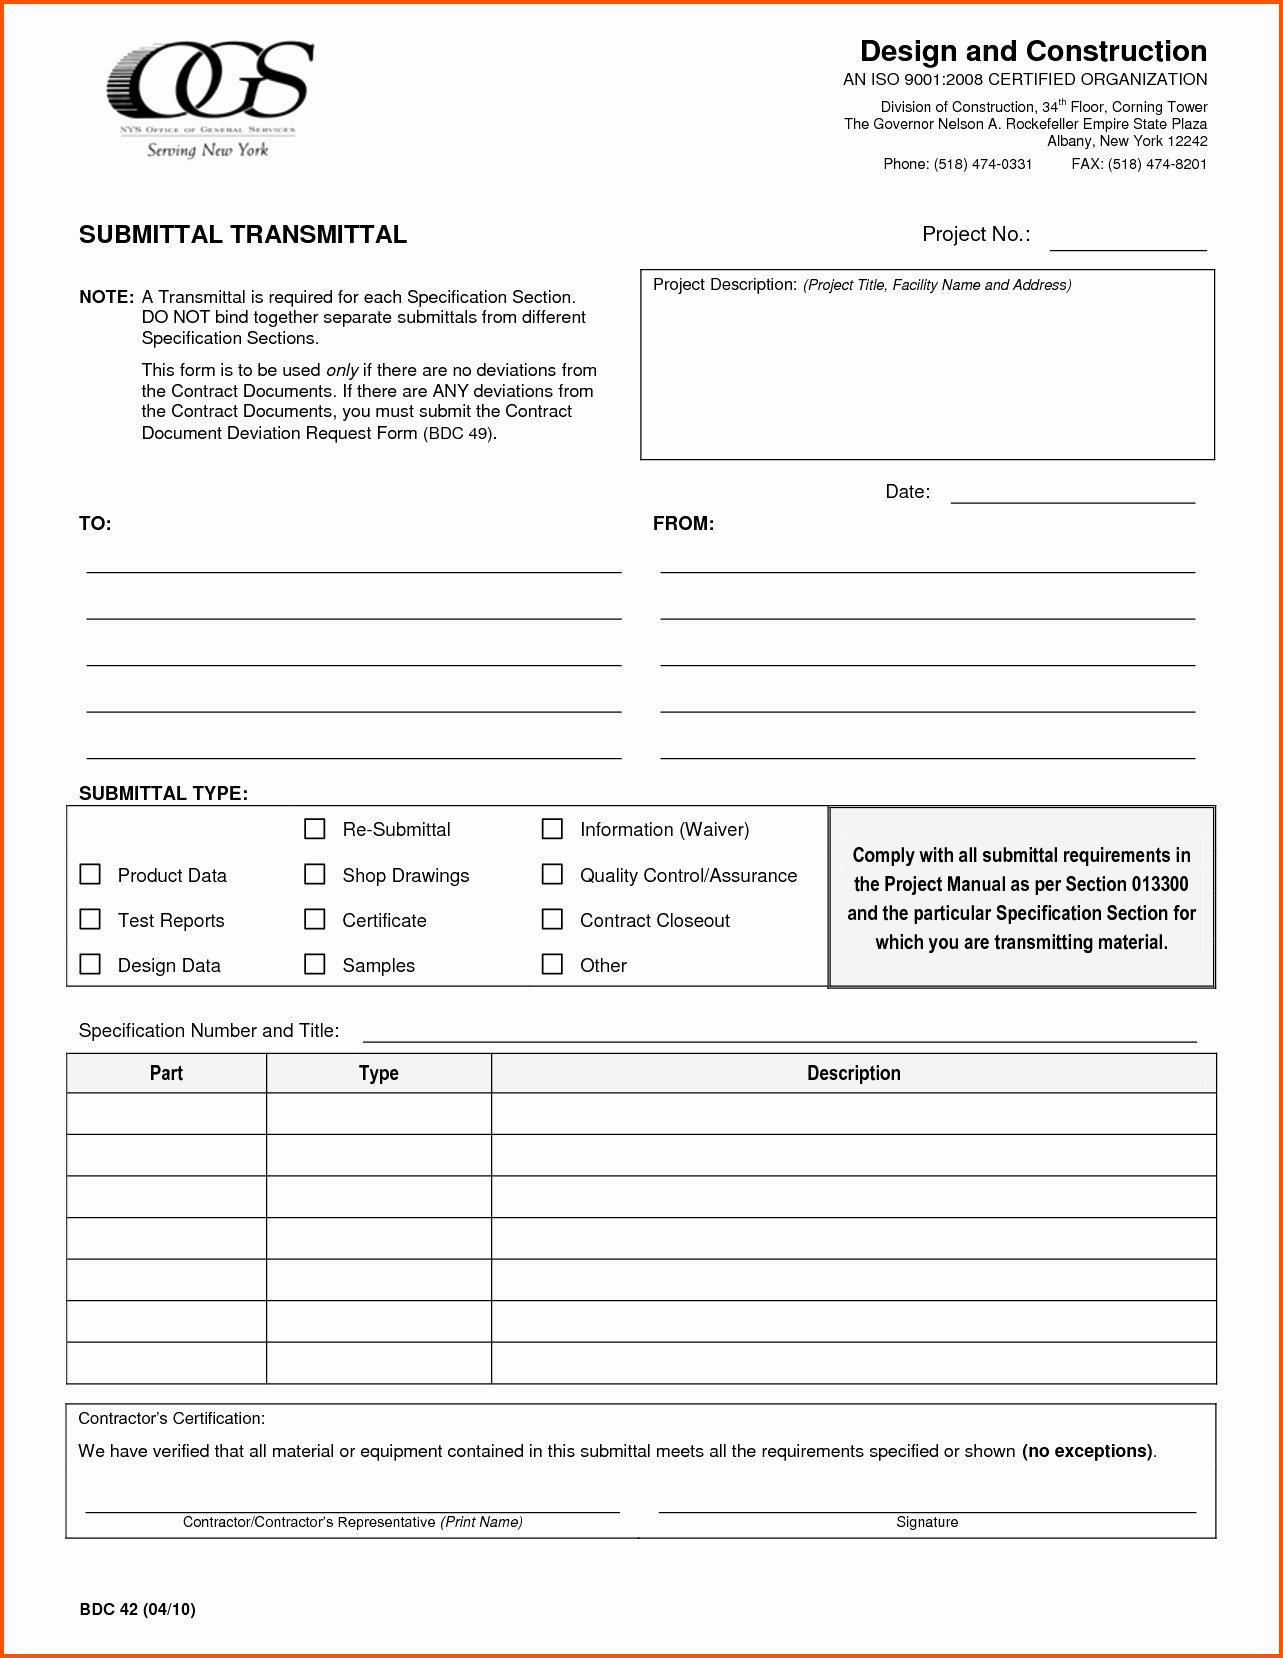 Letter Transmittal Template Construction Collection